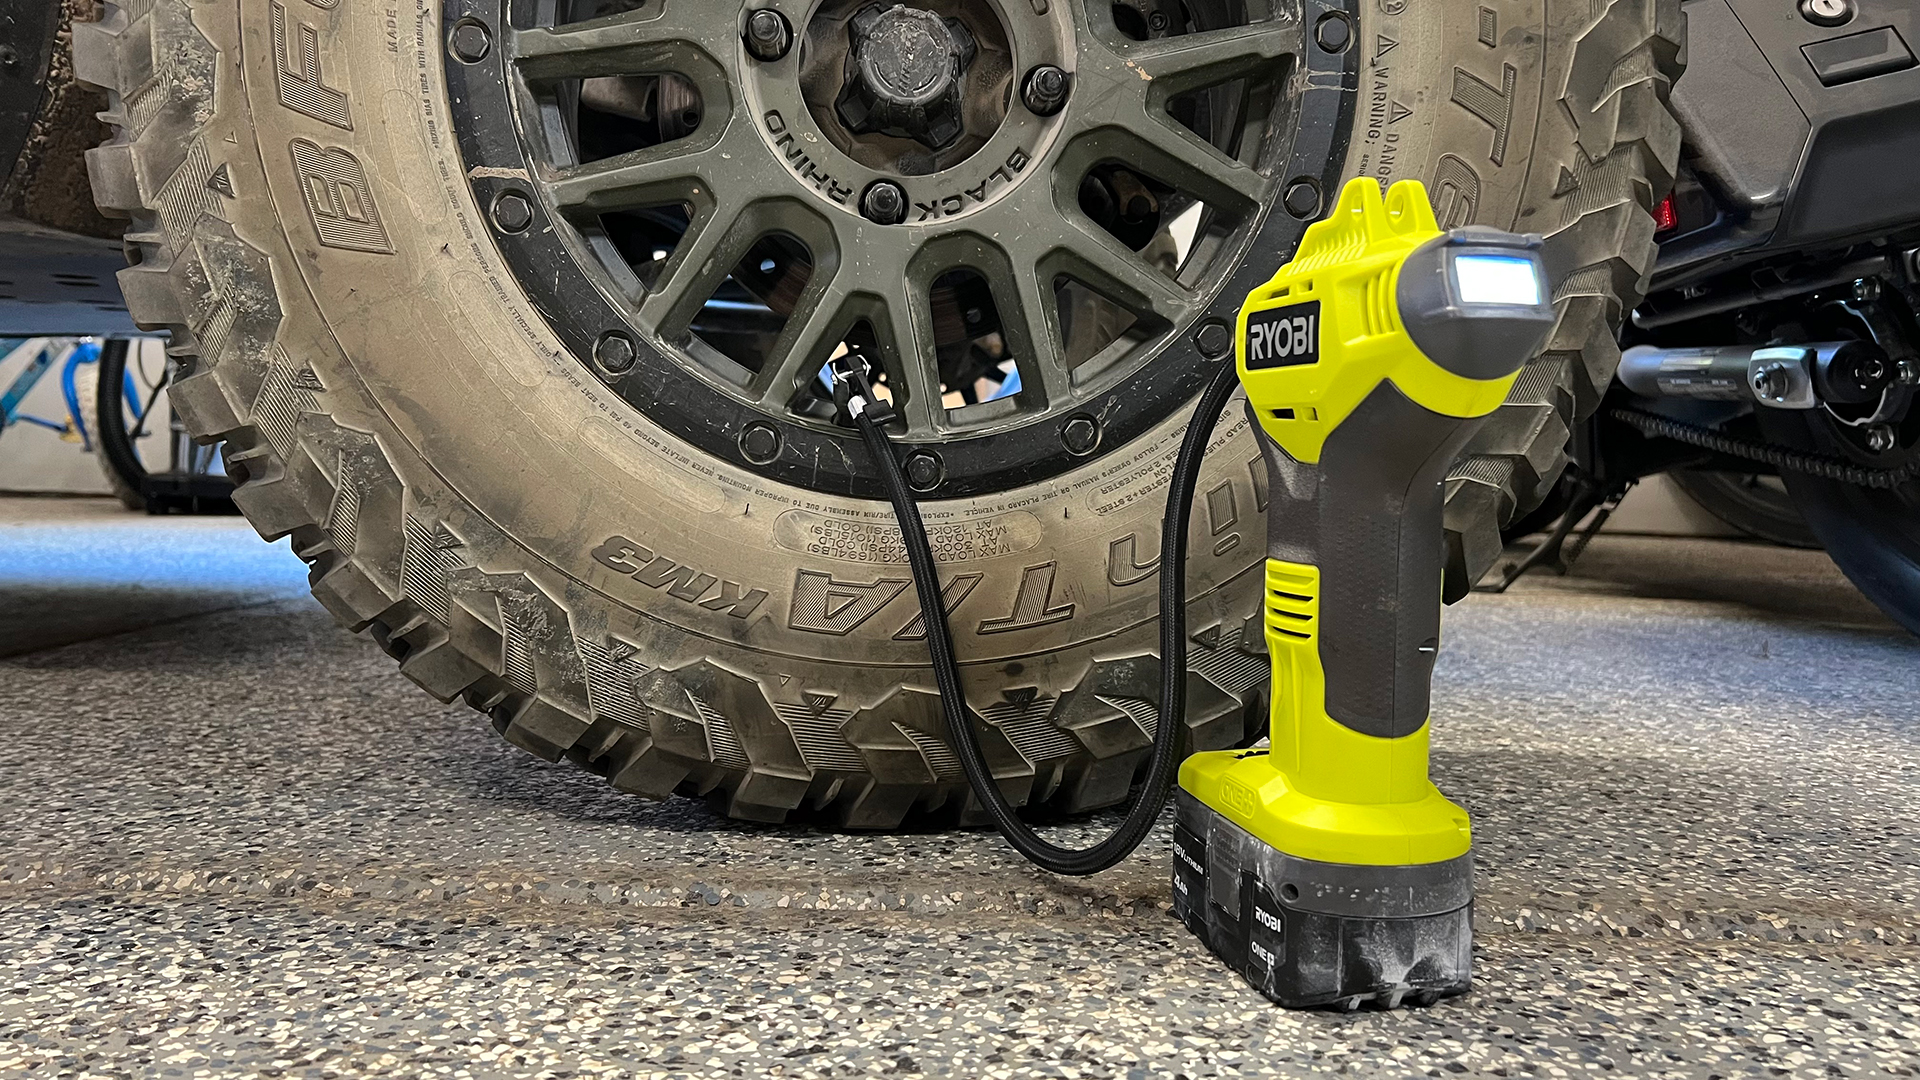 These 5 best-selling portable tire inflators are on sale for up to